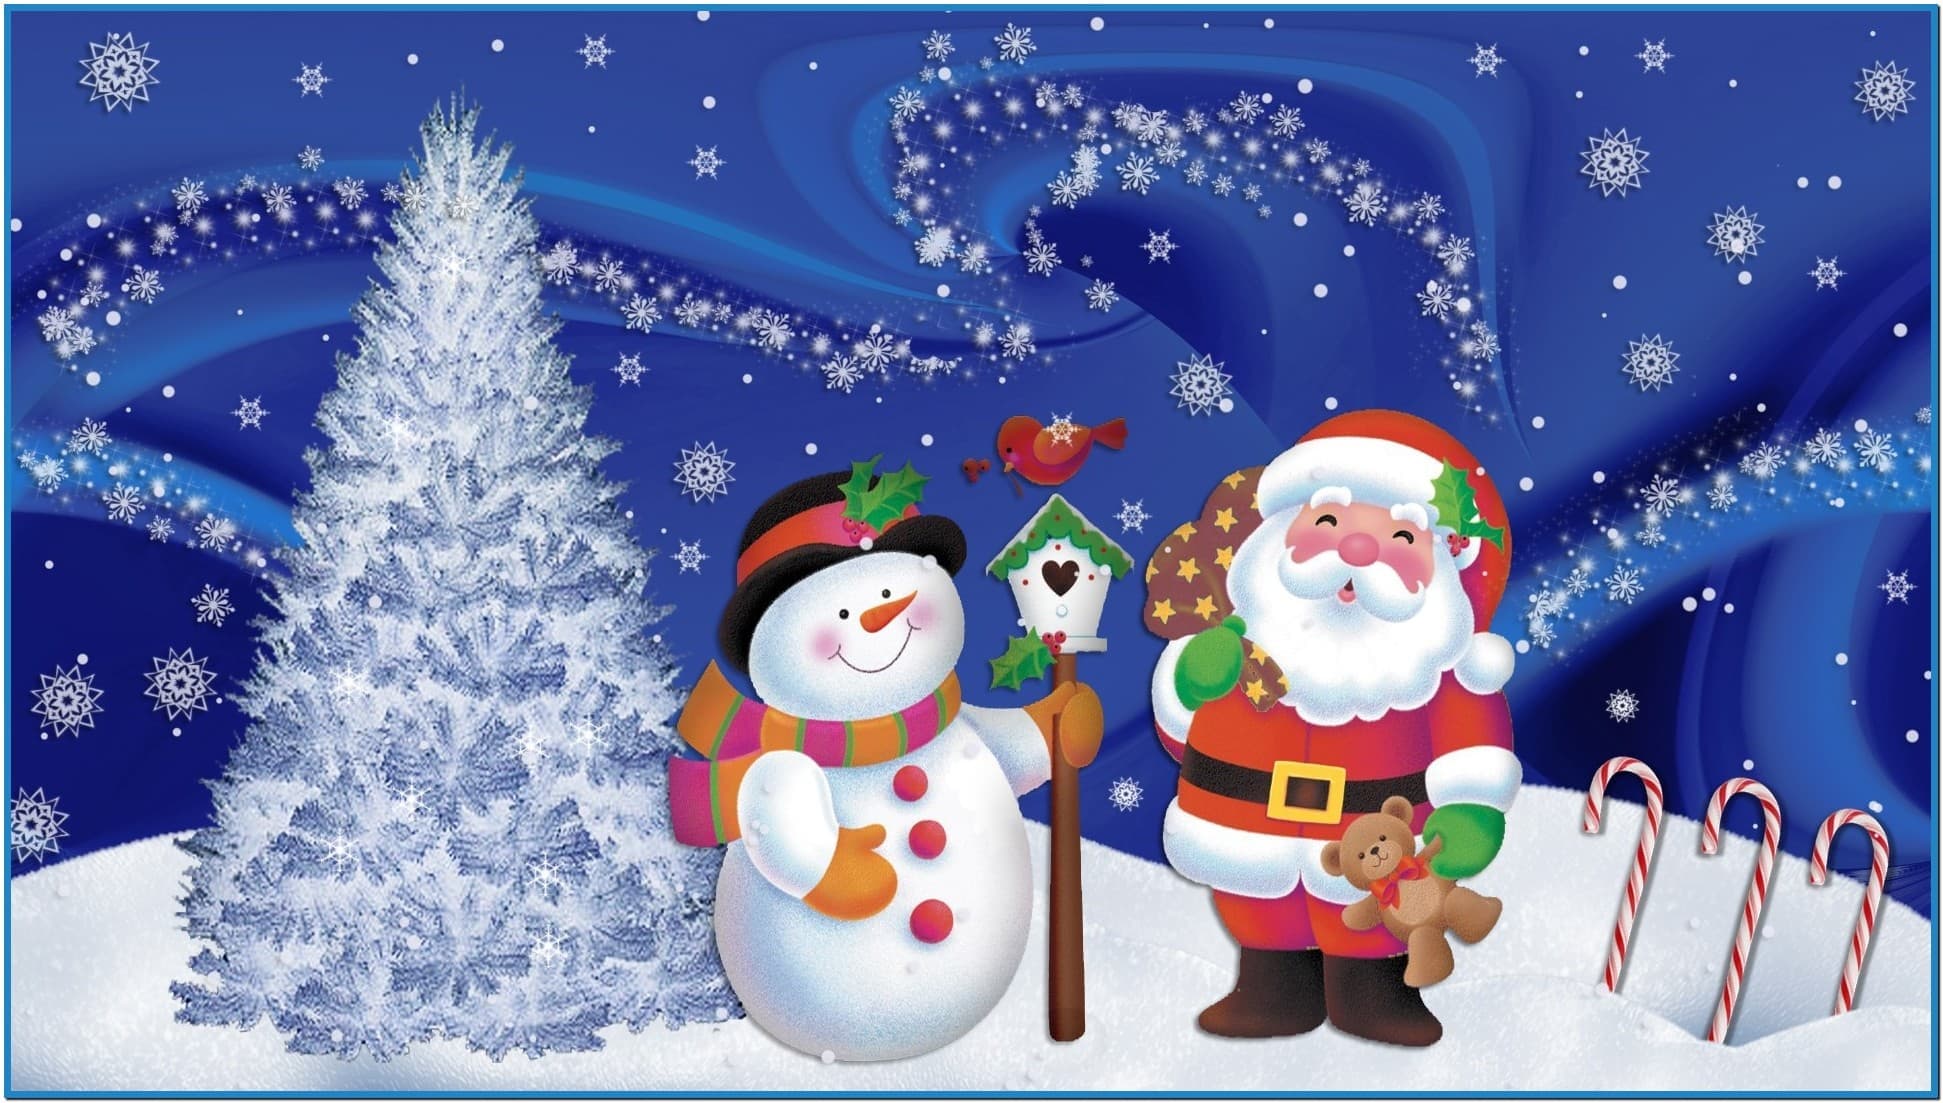 Christmas wallpapers and screensavers   Download free